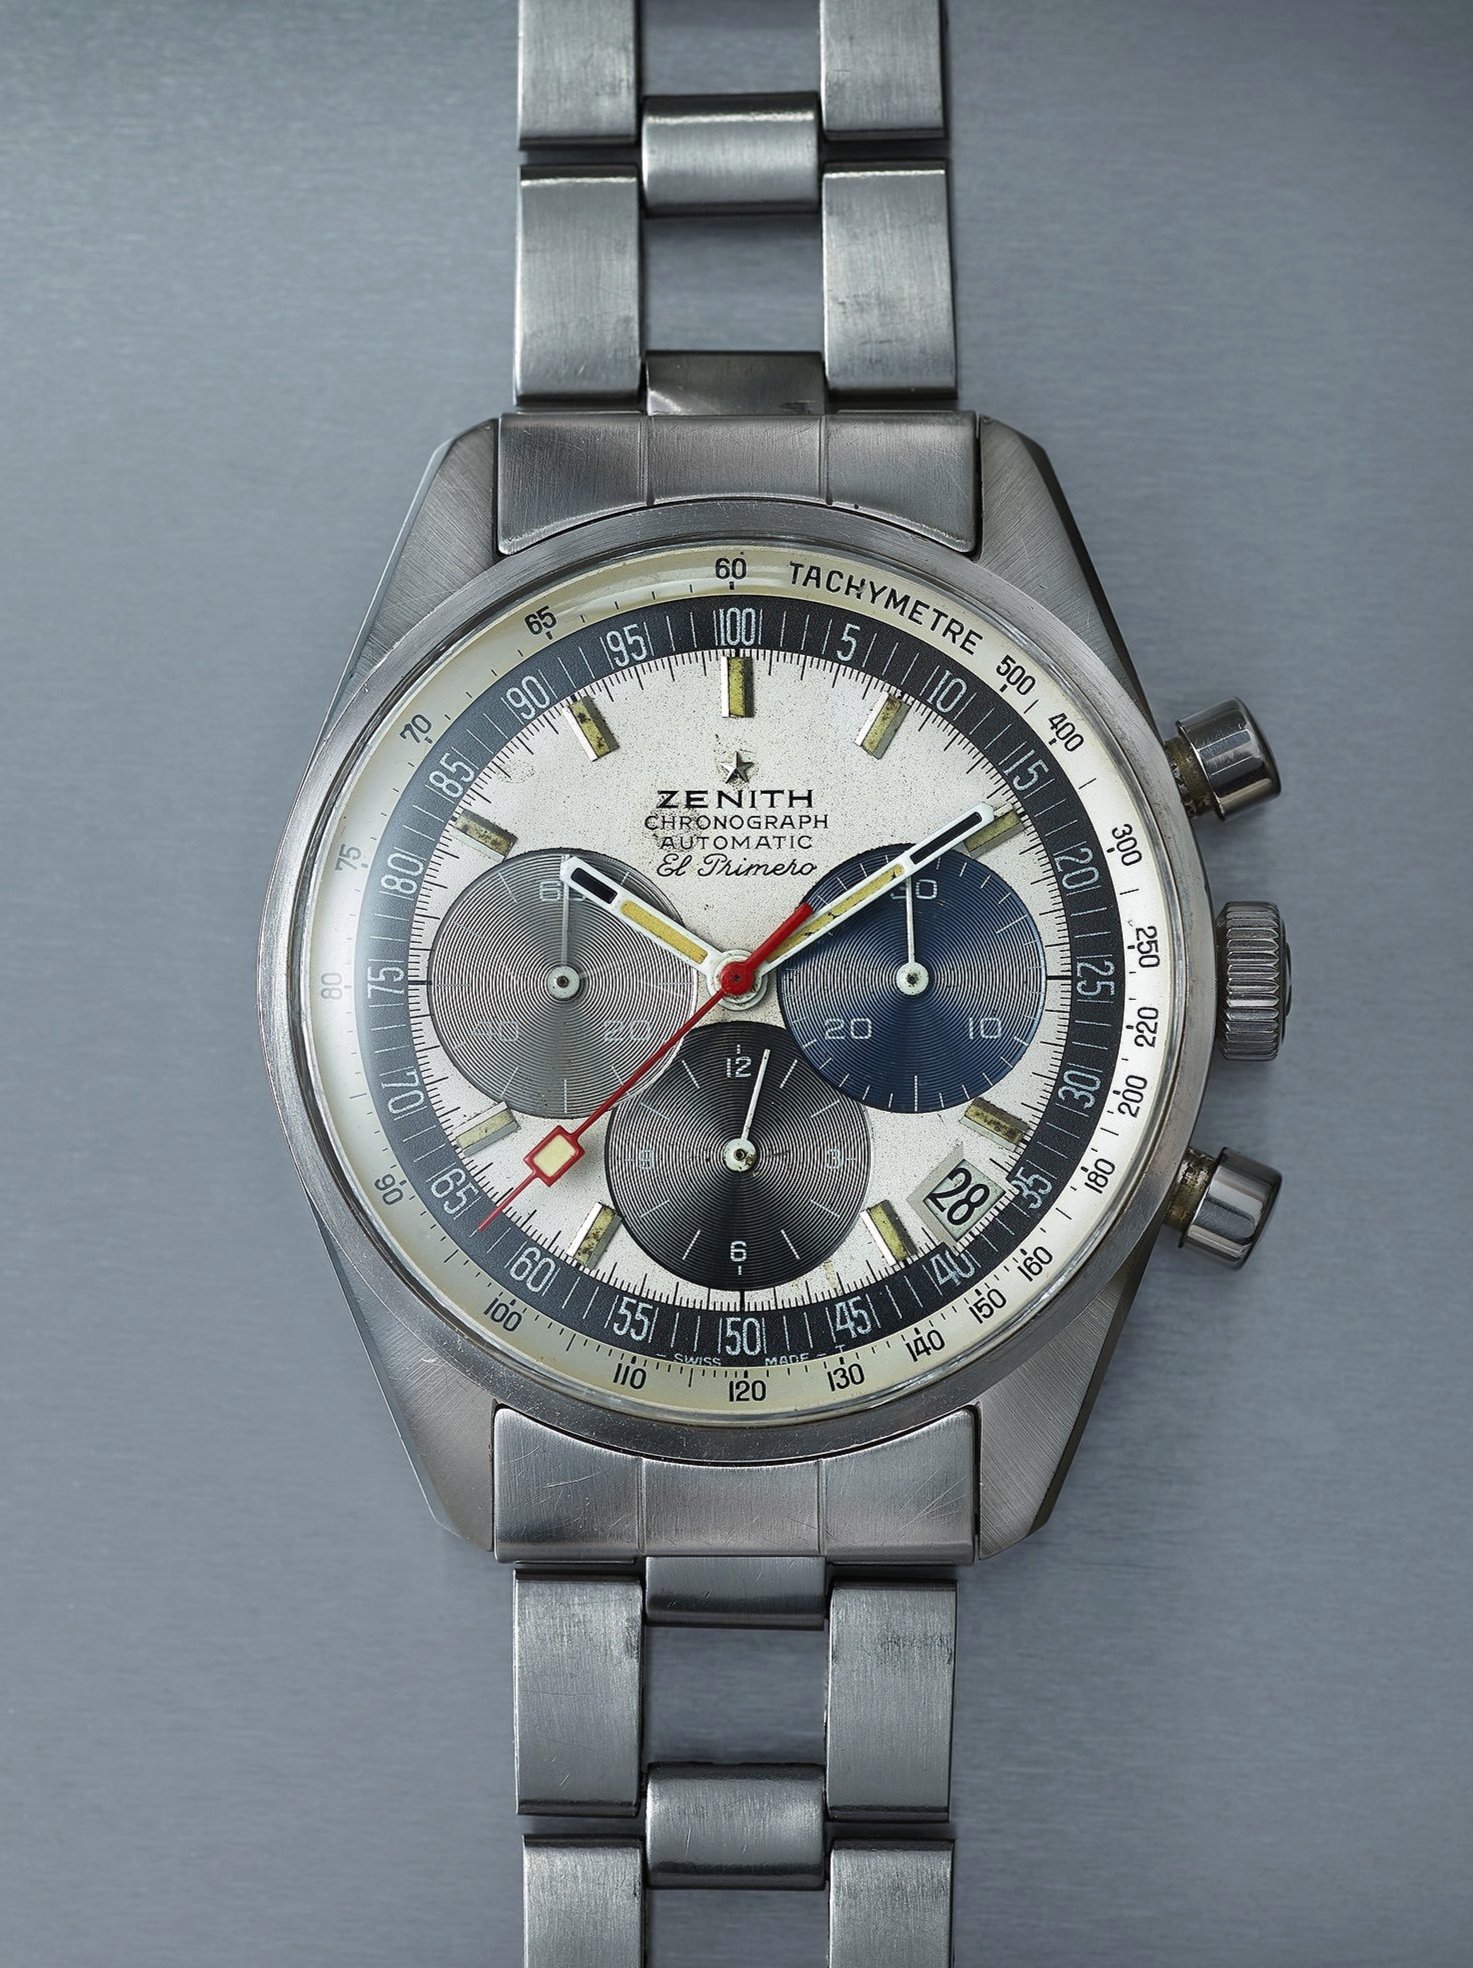  Vintage A386 Zenith watch shot for The Road Rat magazine 